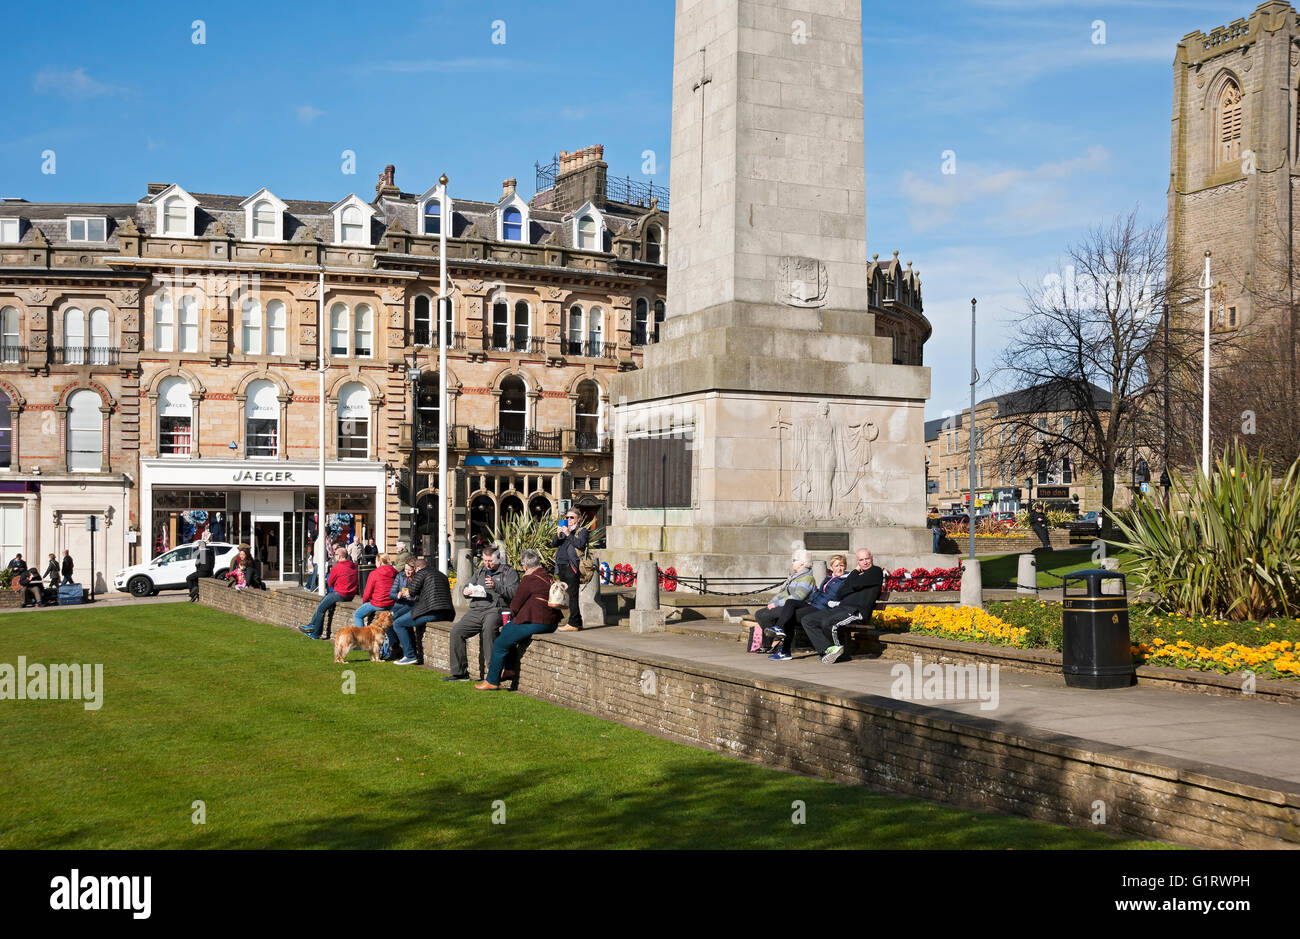 People visitors enjoying the spring sunshine in the town centre Cambridge Crescent Harrogate North Yorkshire England UK United Kingdom Great Britain Stock Photo